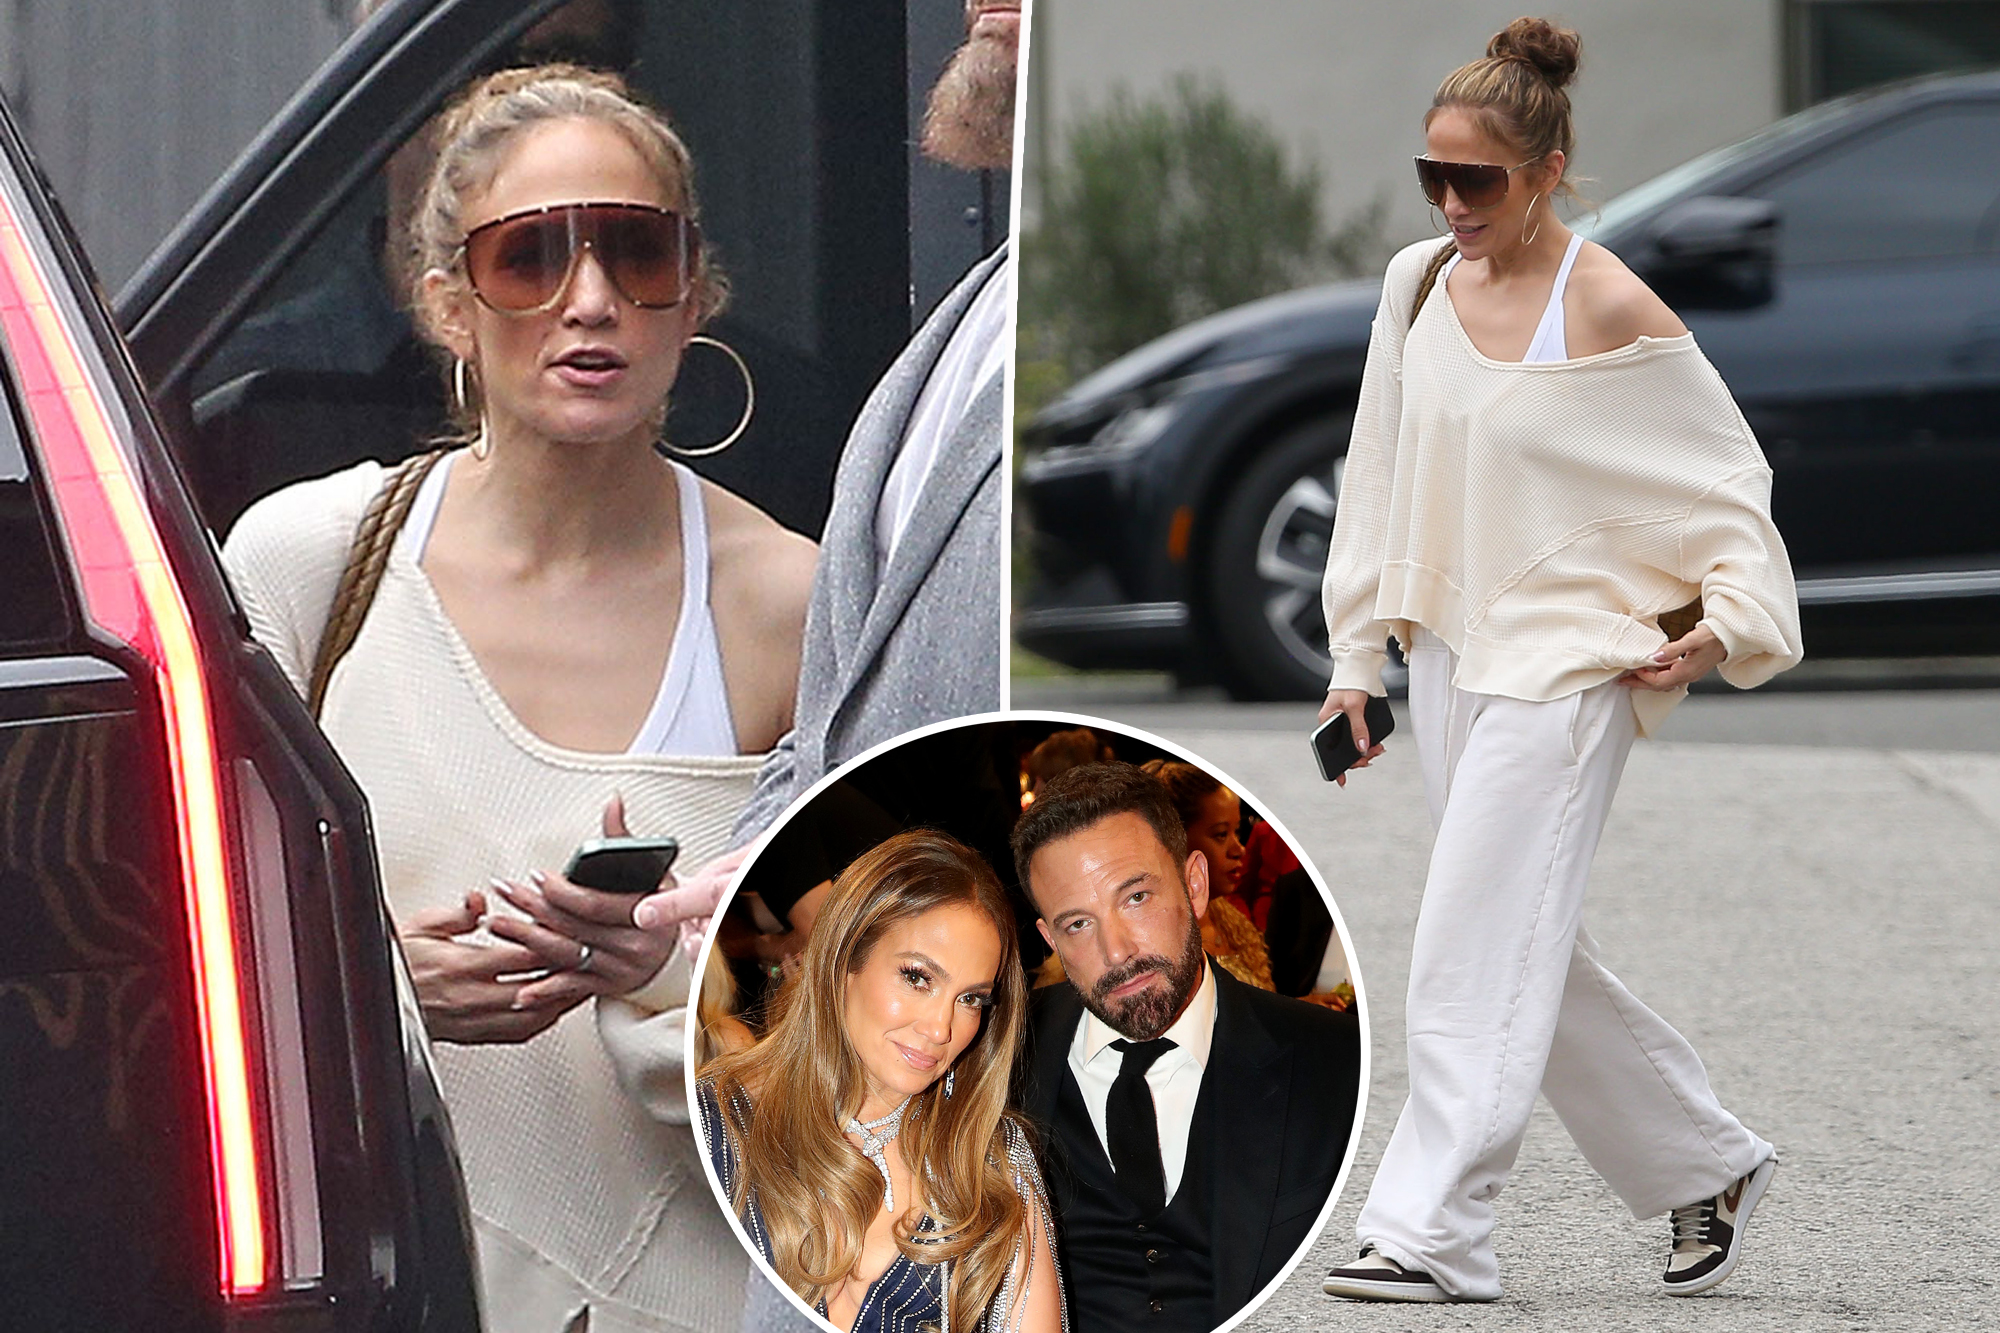 Jennifer Lopez Radiates Positivity at Dance Rehearsal Amidst Speculation of Relationship Troubles